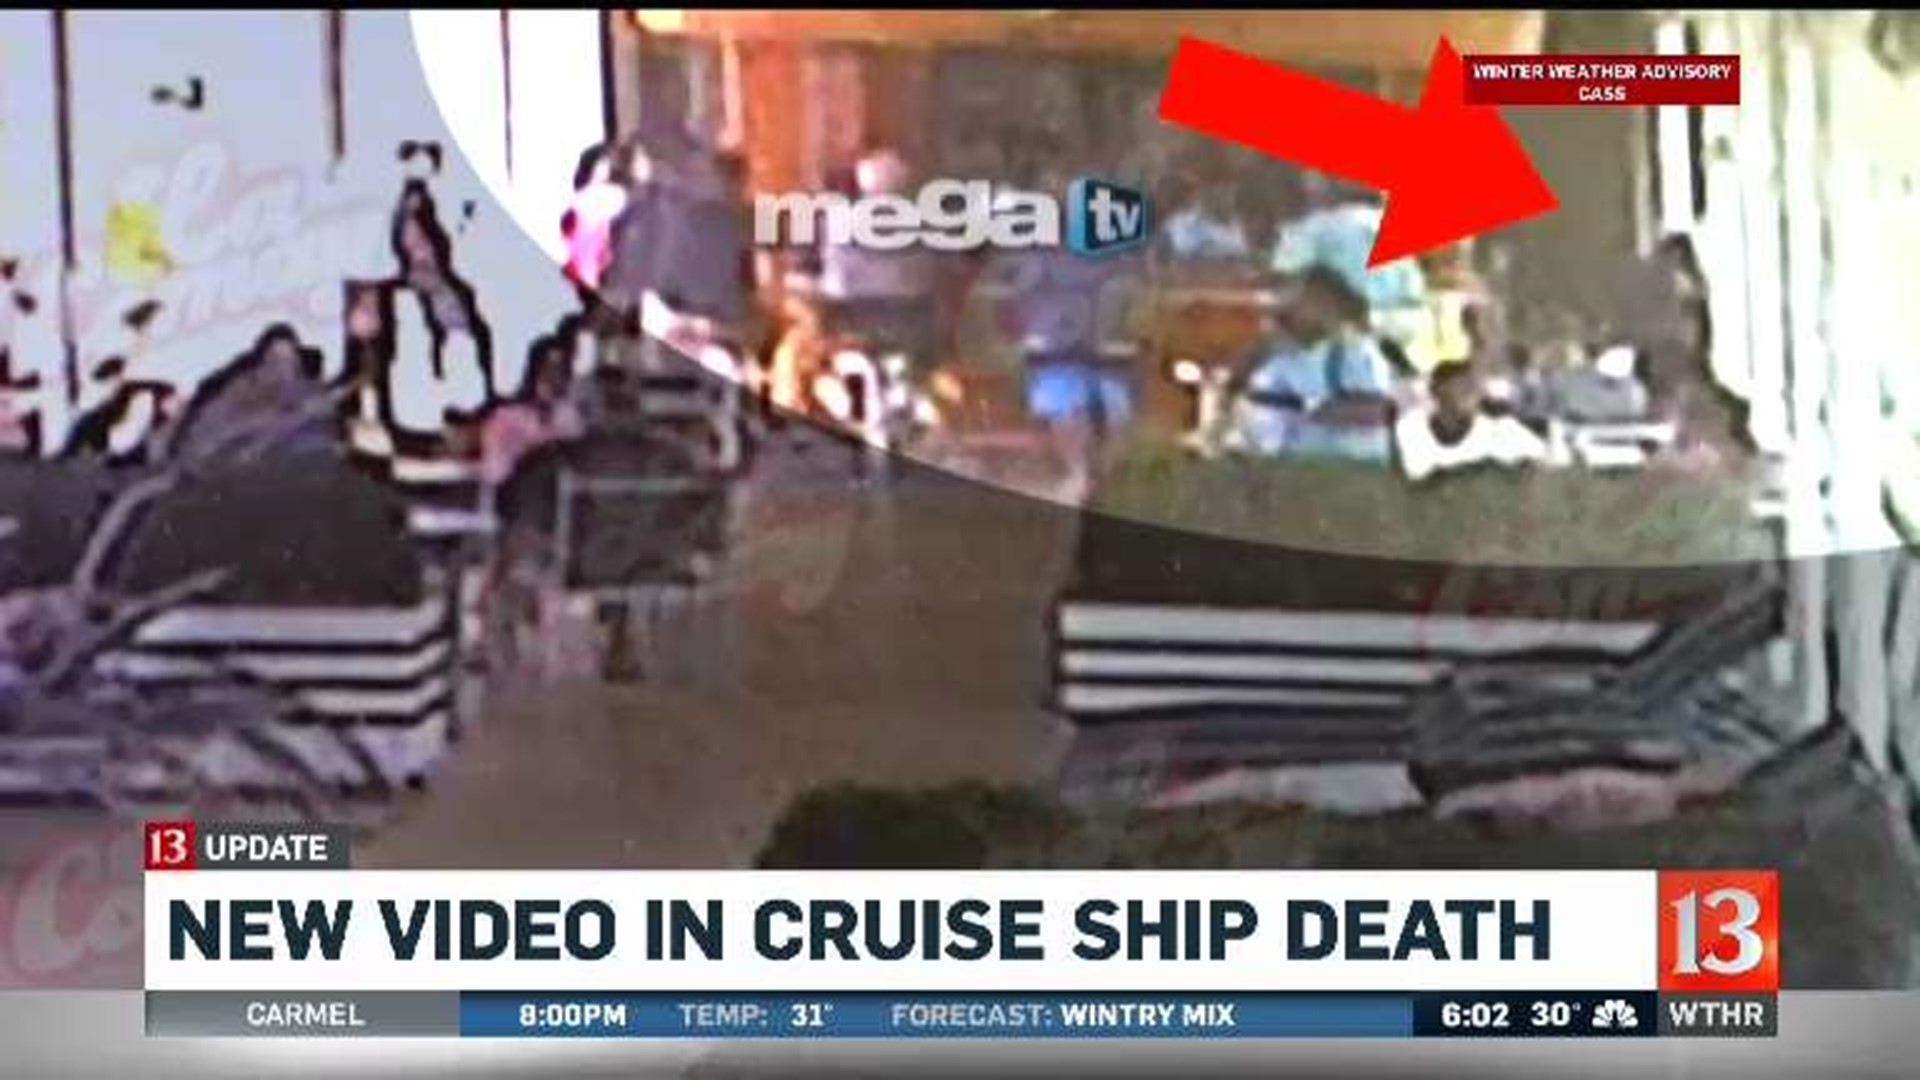 New video in cruise ship death